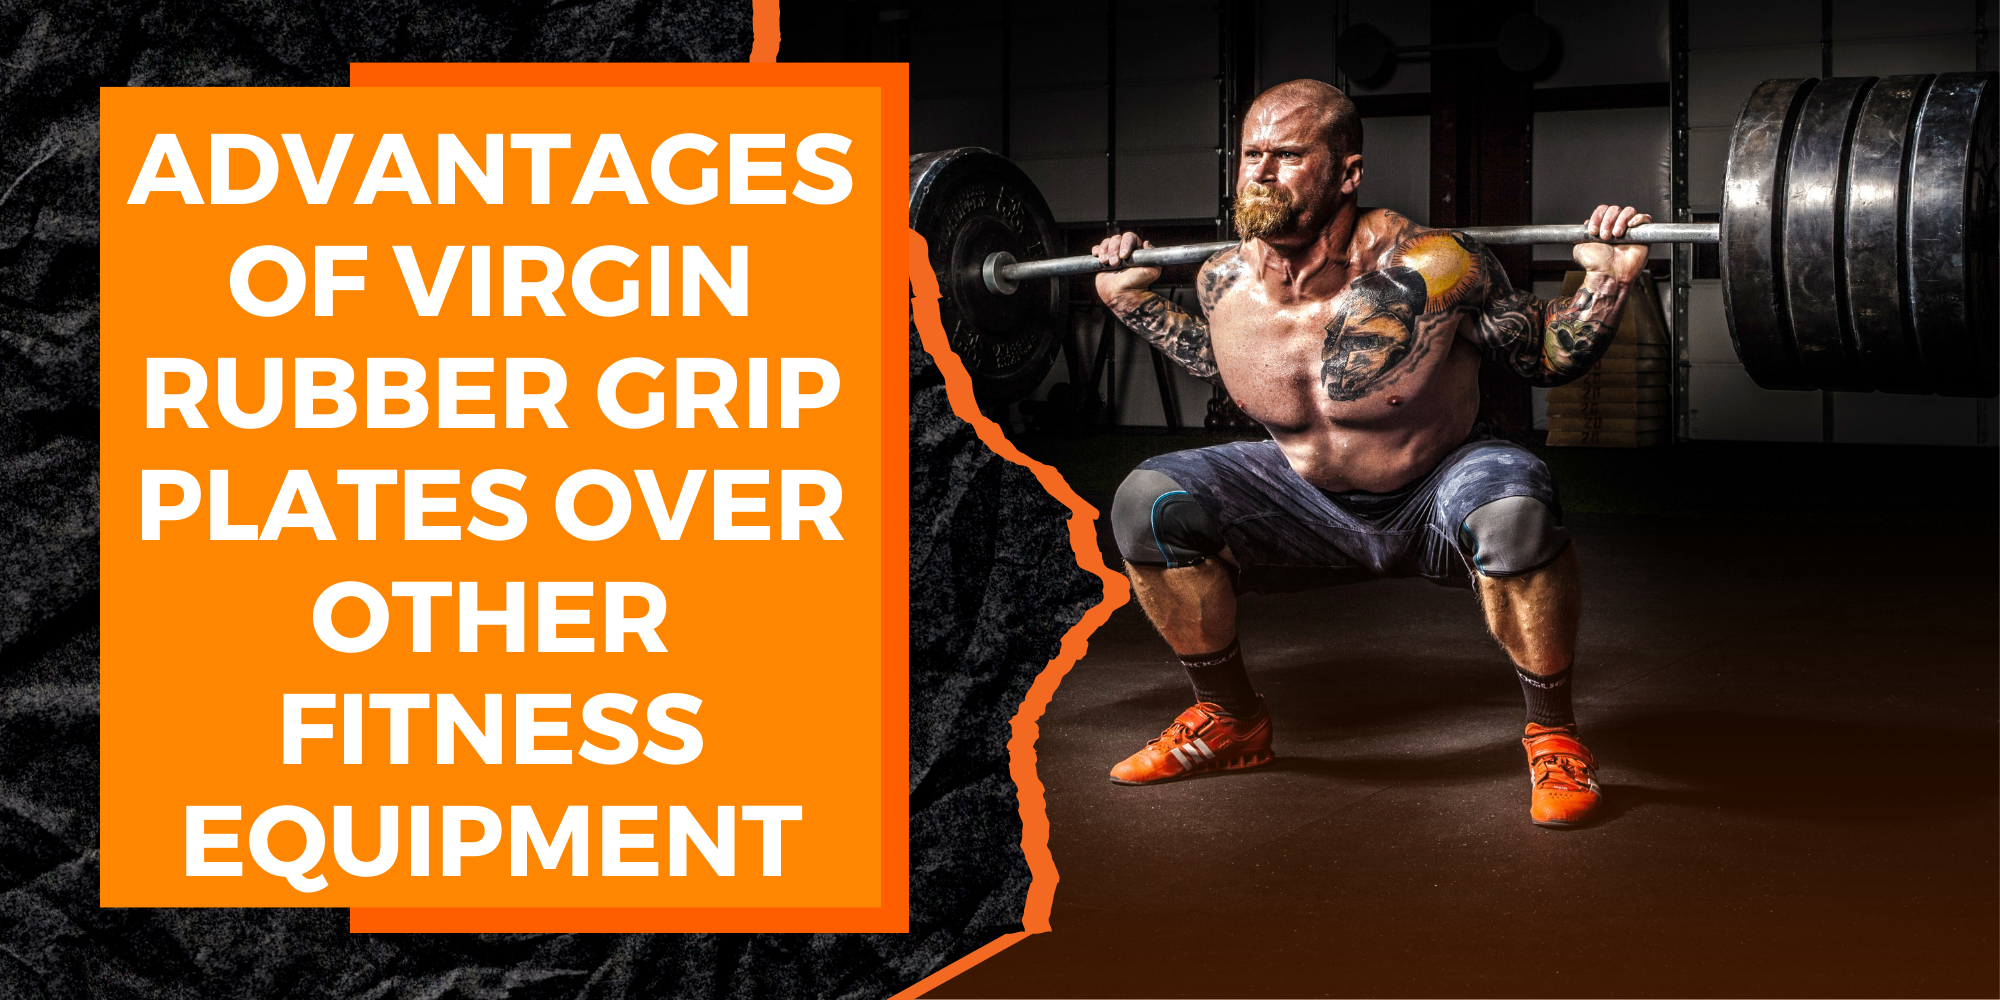 What Are the Advantages of Virgin Rubber Grip Plates Over Other Types of Fitness Equipment?